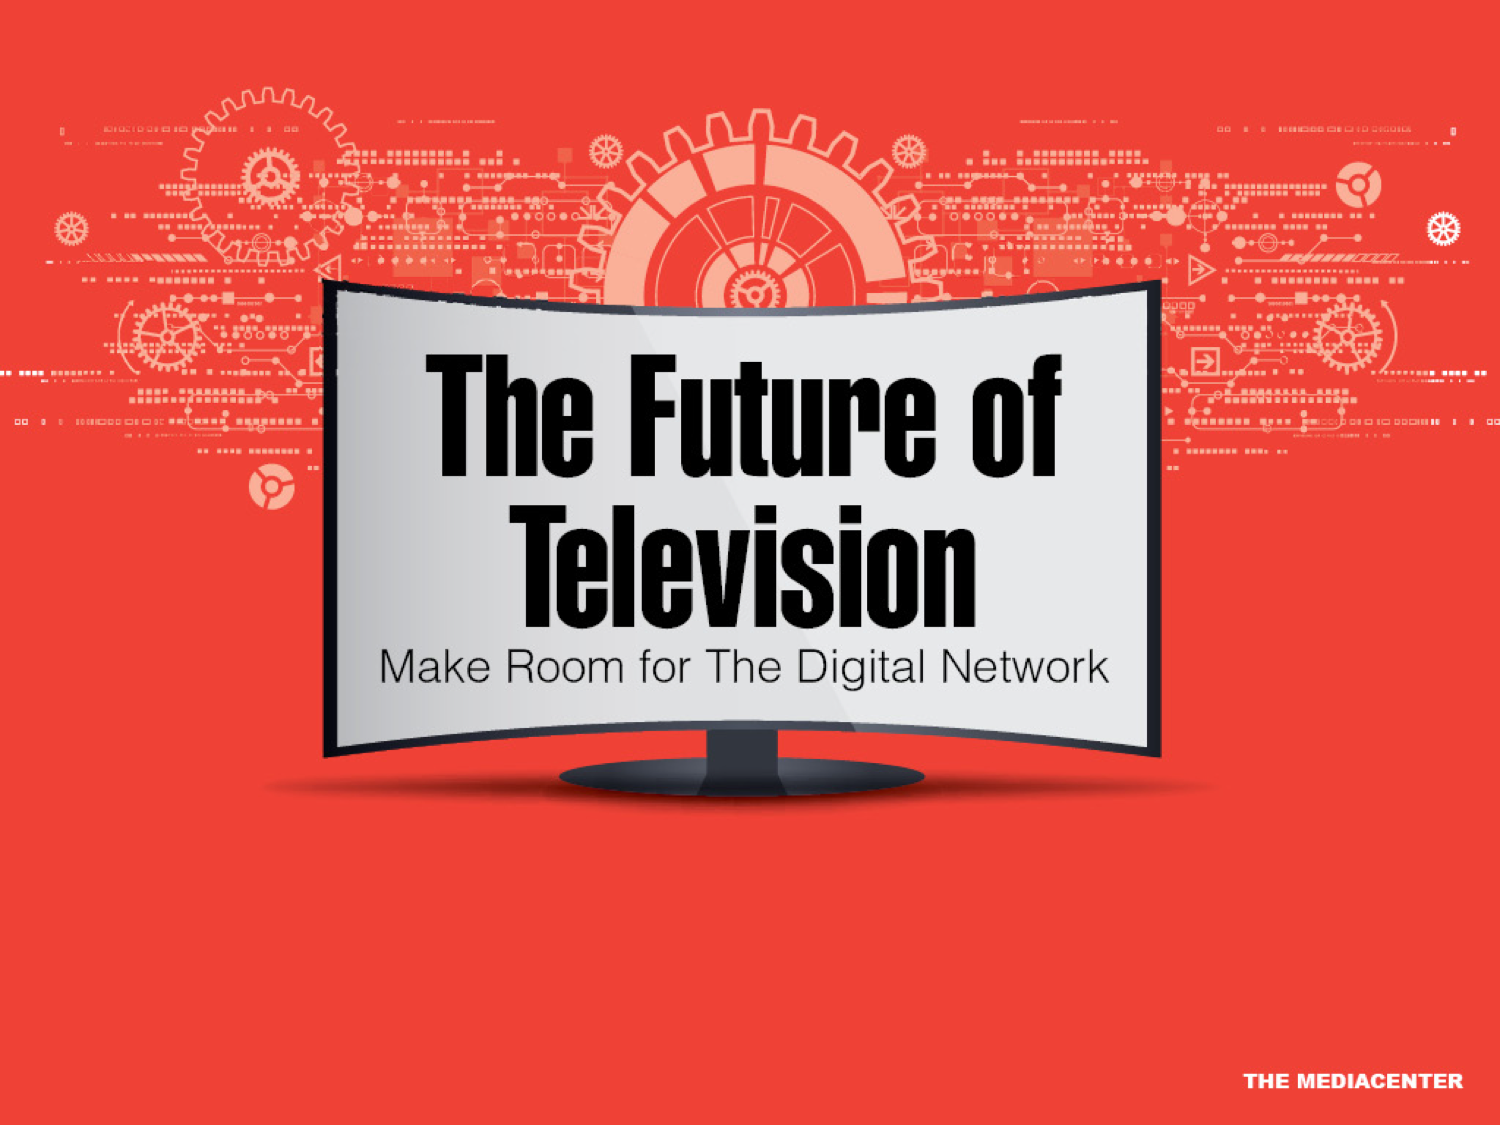 THE FUTURE OF TELEVISION